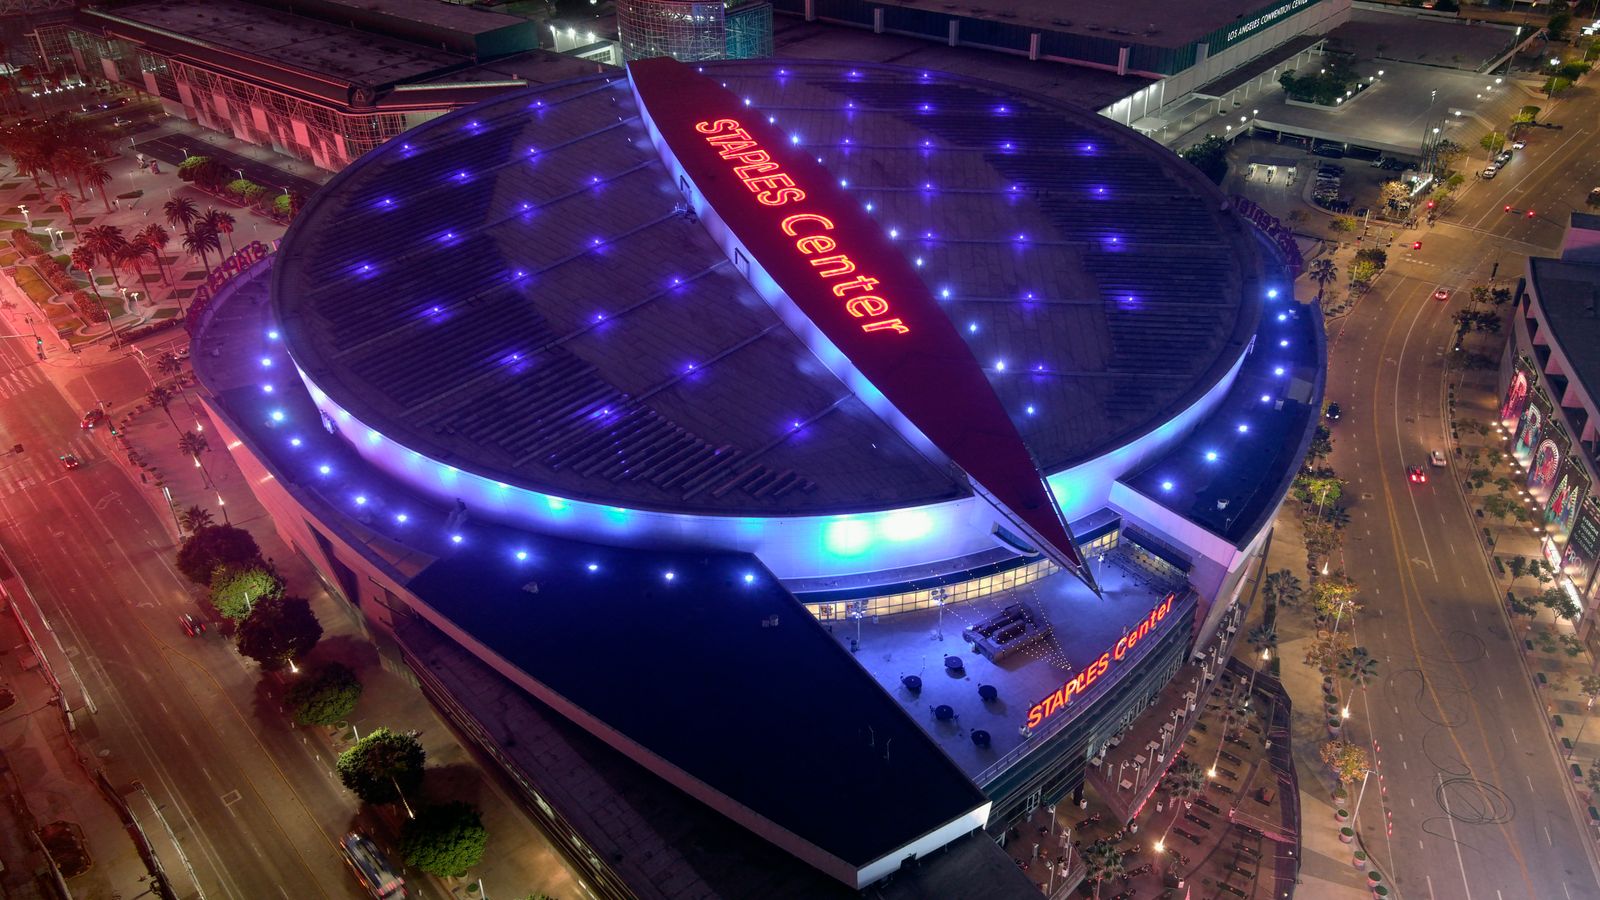 Los Angeles Lakers and Clippers' home arena Staples Center set to